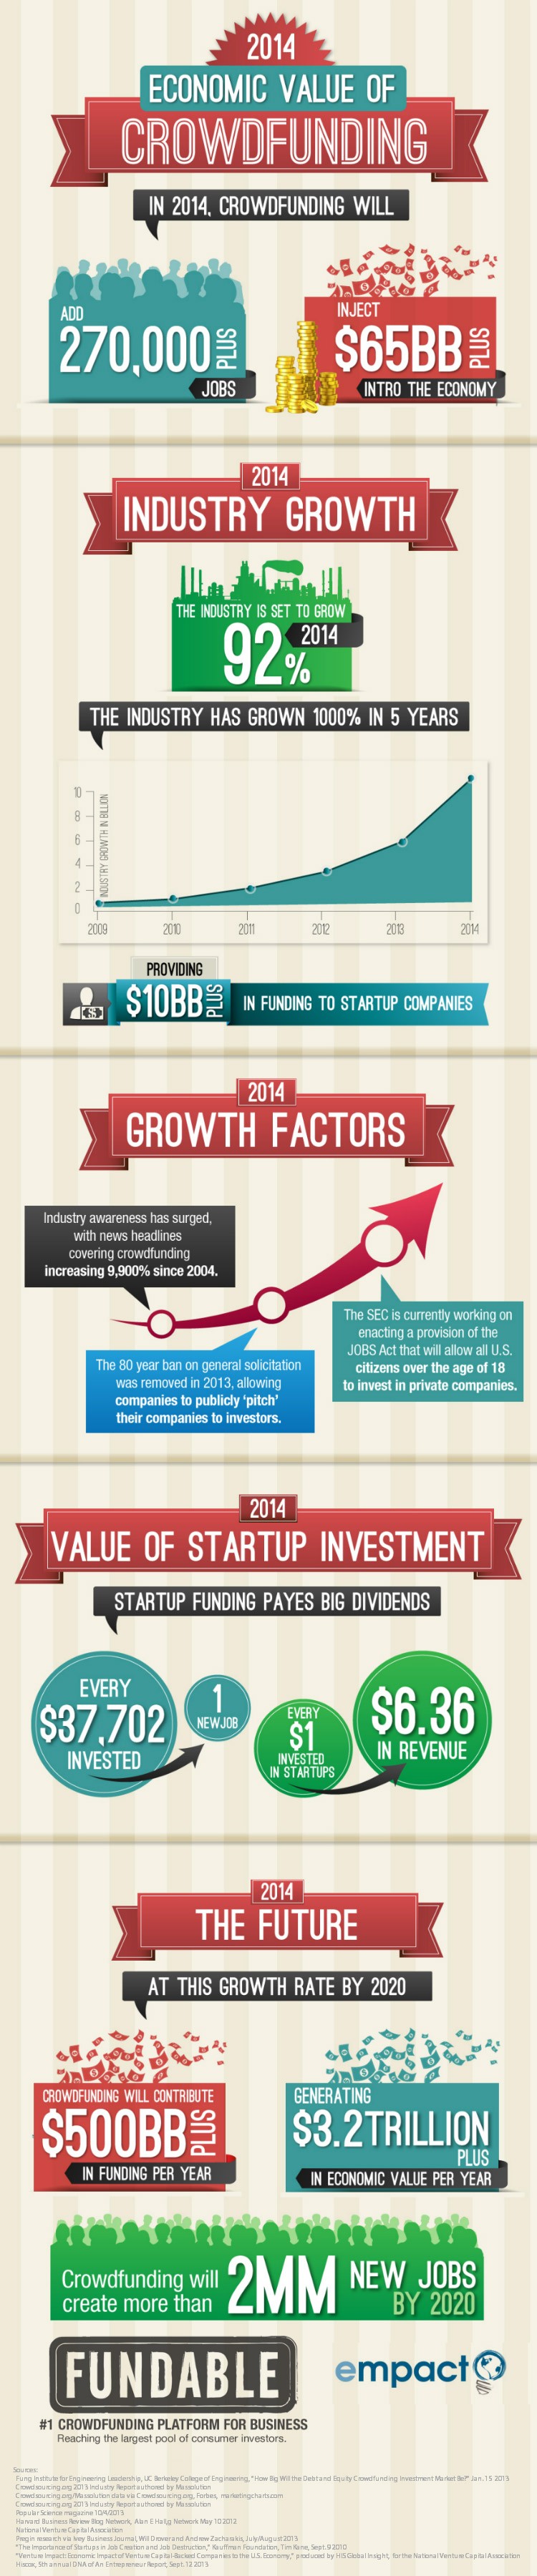 Crowdfunding Seen Providing $65 Billion Boost to the Global Economy in 2014 (Infographic)  width=